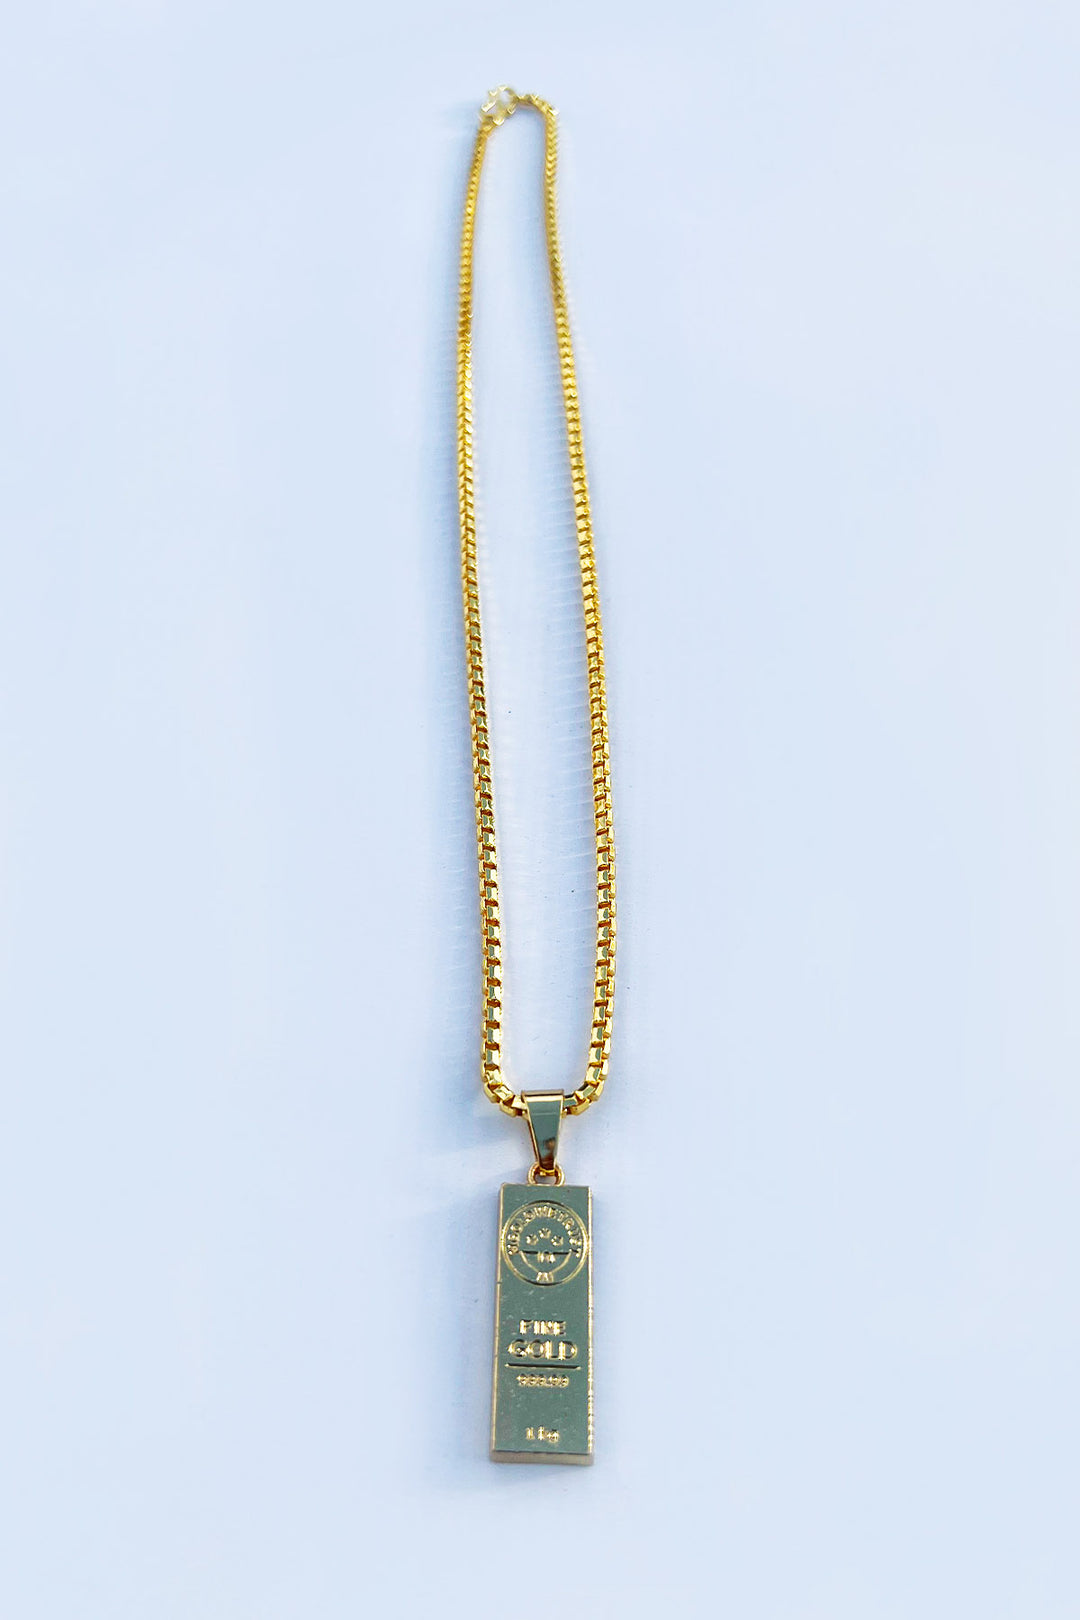 Gold Bar Street Design Necklace - S23 - WJW0027